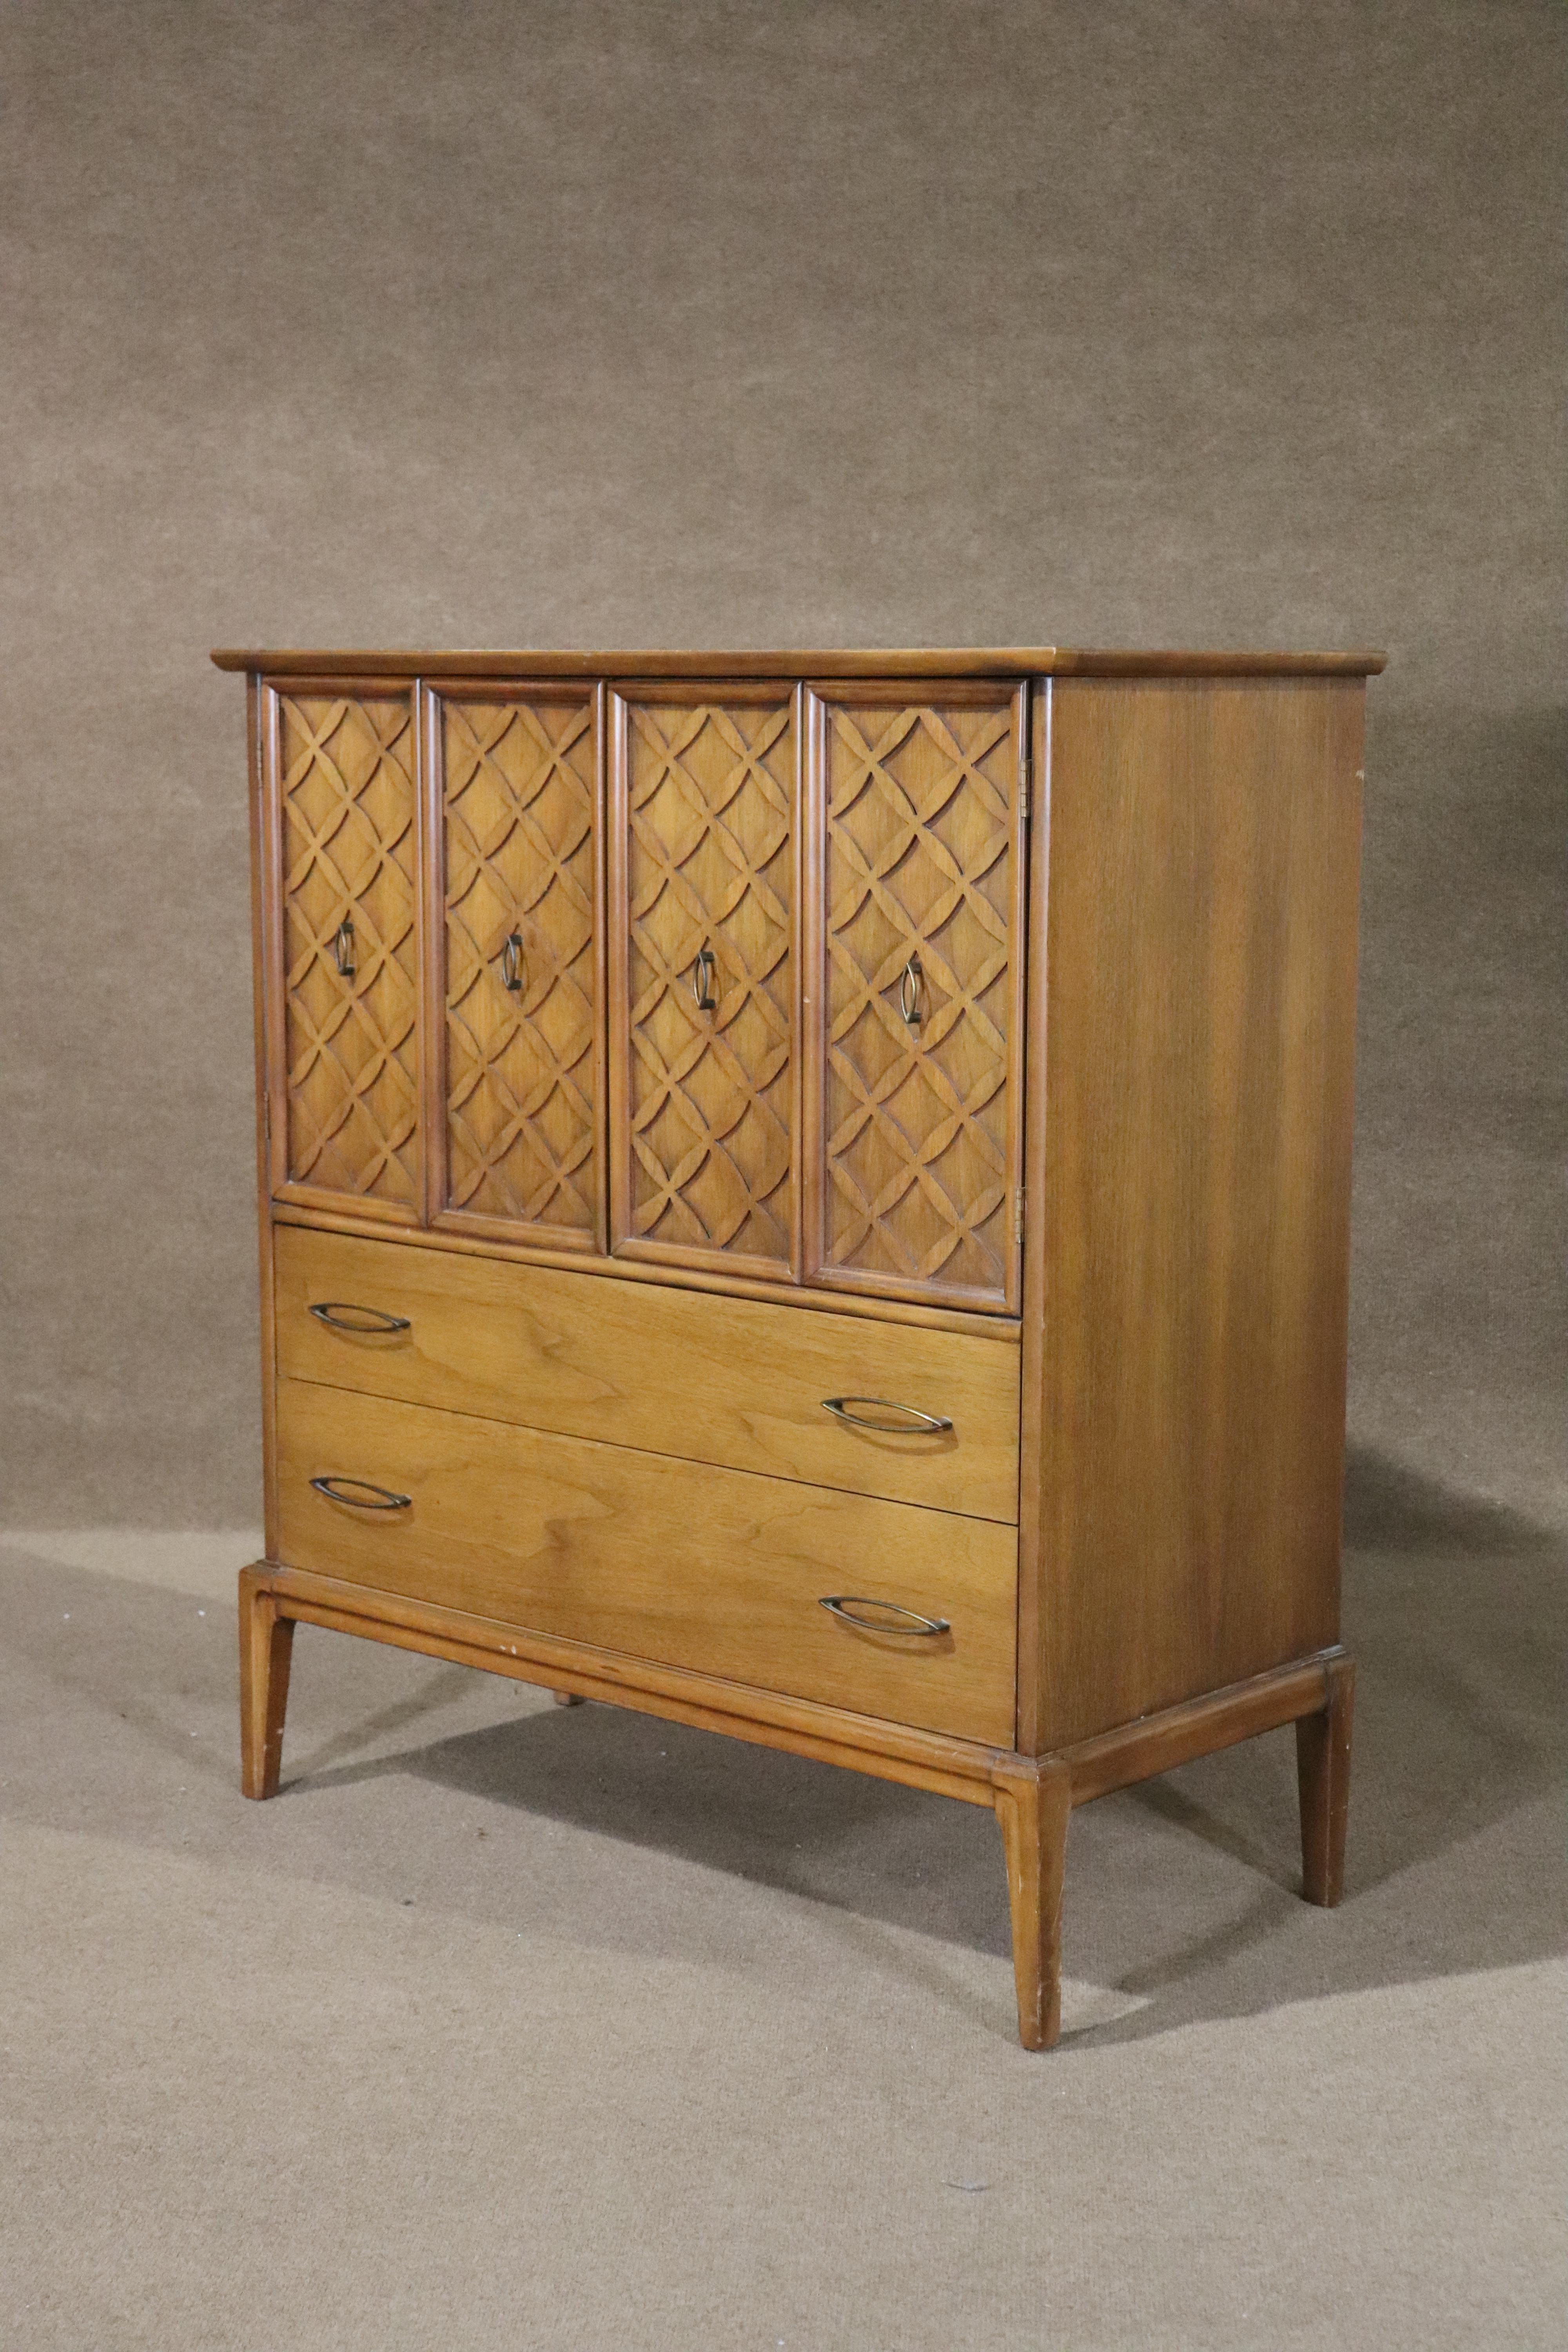 Mid-century modern chest of drawers in walnut with brass cat eye handles and lattice front doors. Drawers plus storage space give you options for your bedroom.
Please confirm location NY or NJ